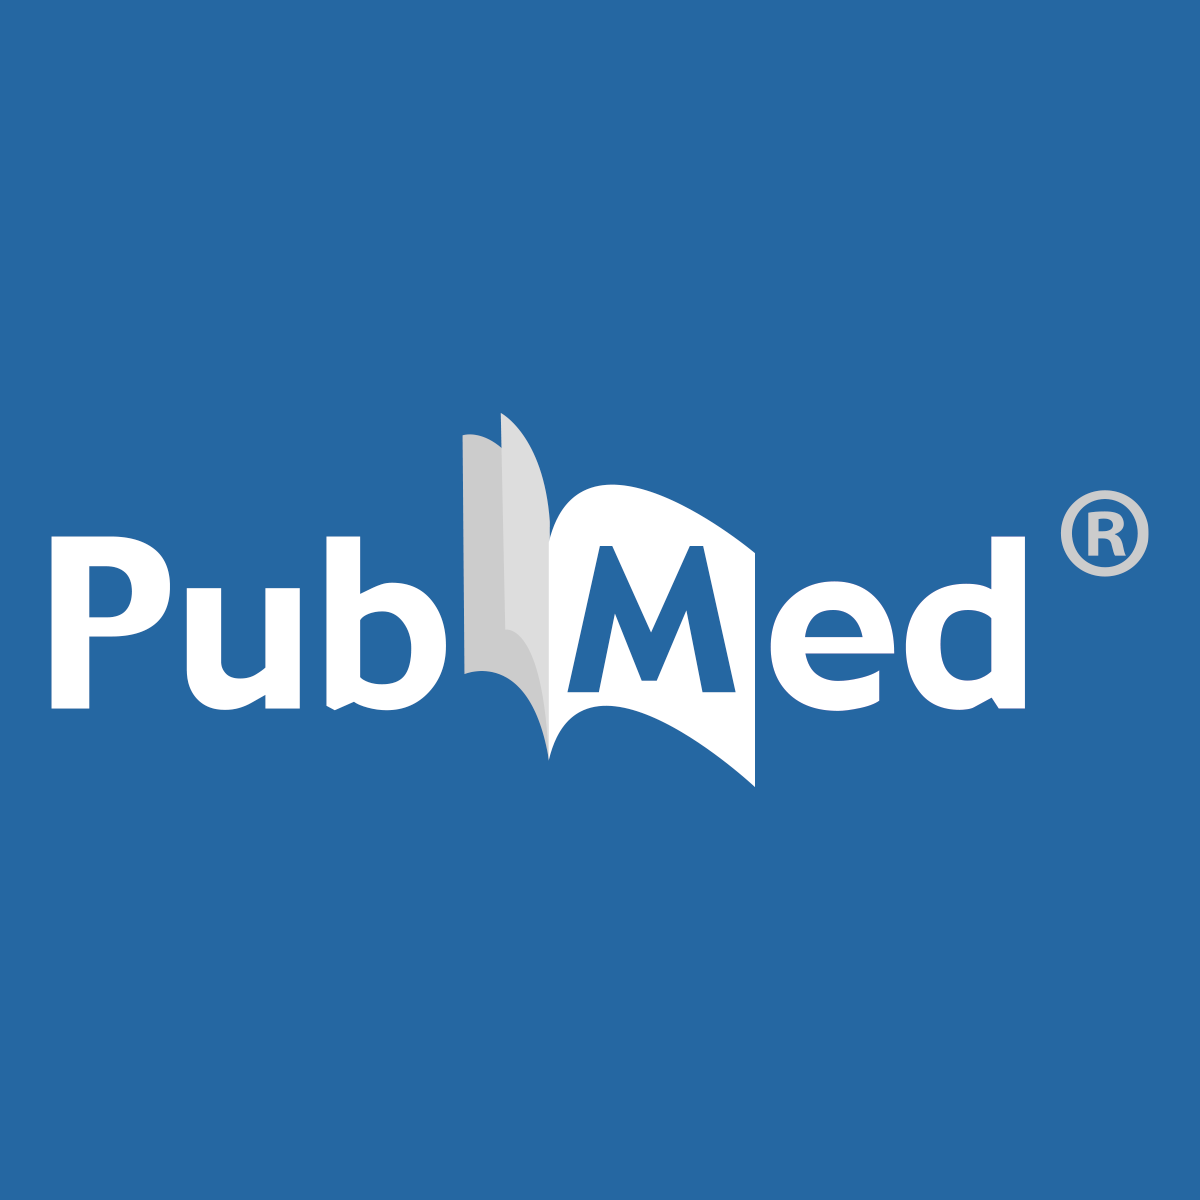 Real-world treatment patterns and outcomes of abemaciclib for the treatment of HR + , HER2- metastatic breast cancer patients in Japan - PubMed